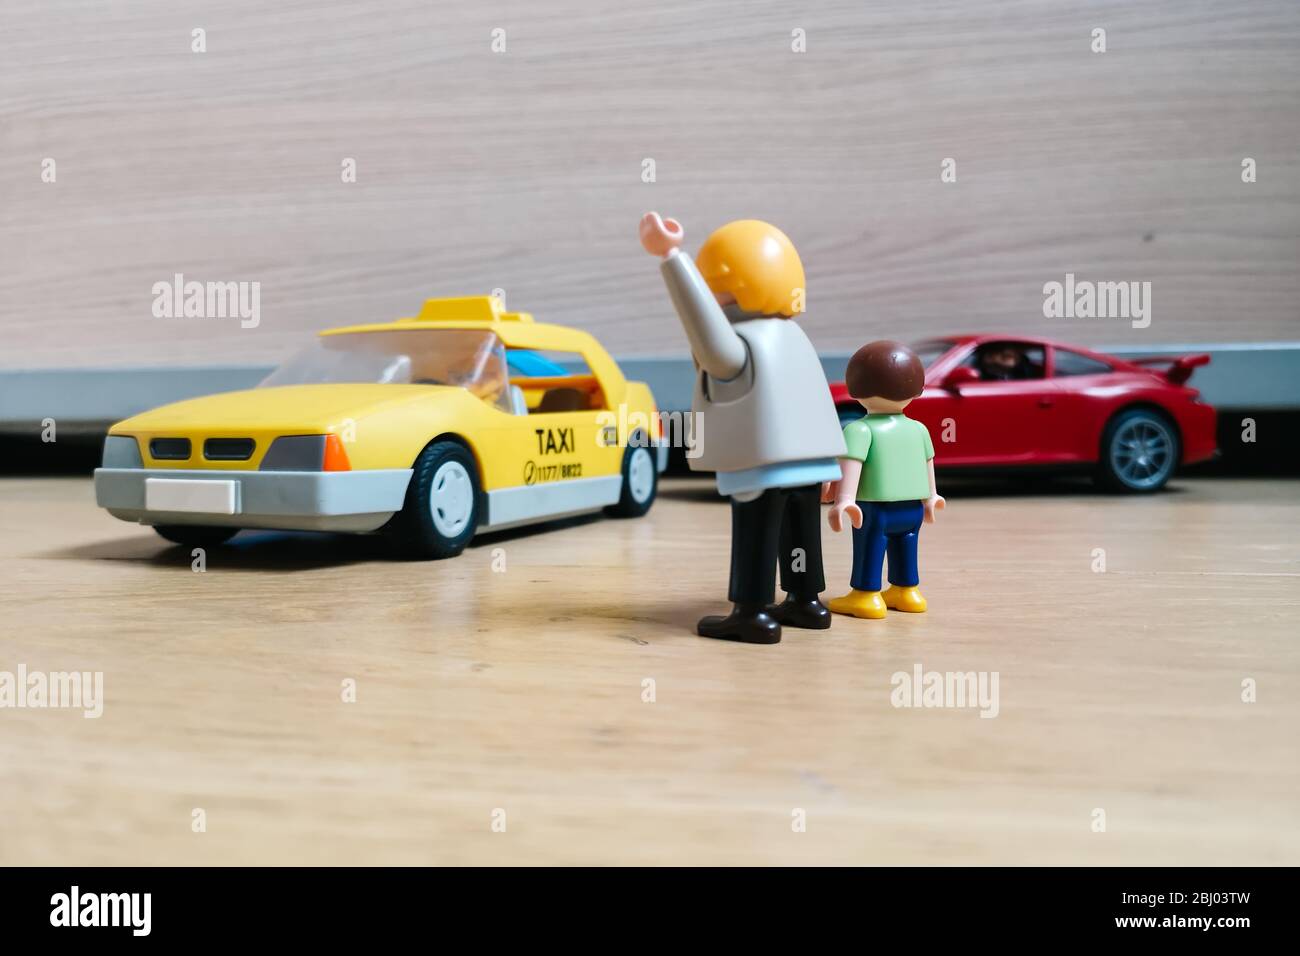 Madrid, Spain - July 13, 2019: Playmobil figurines in scene representing man with child stopping a taxi. Concept public transportation Stock Photo